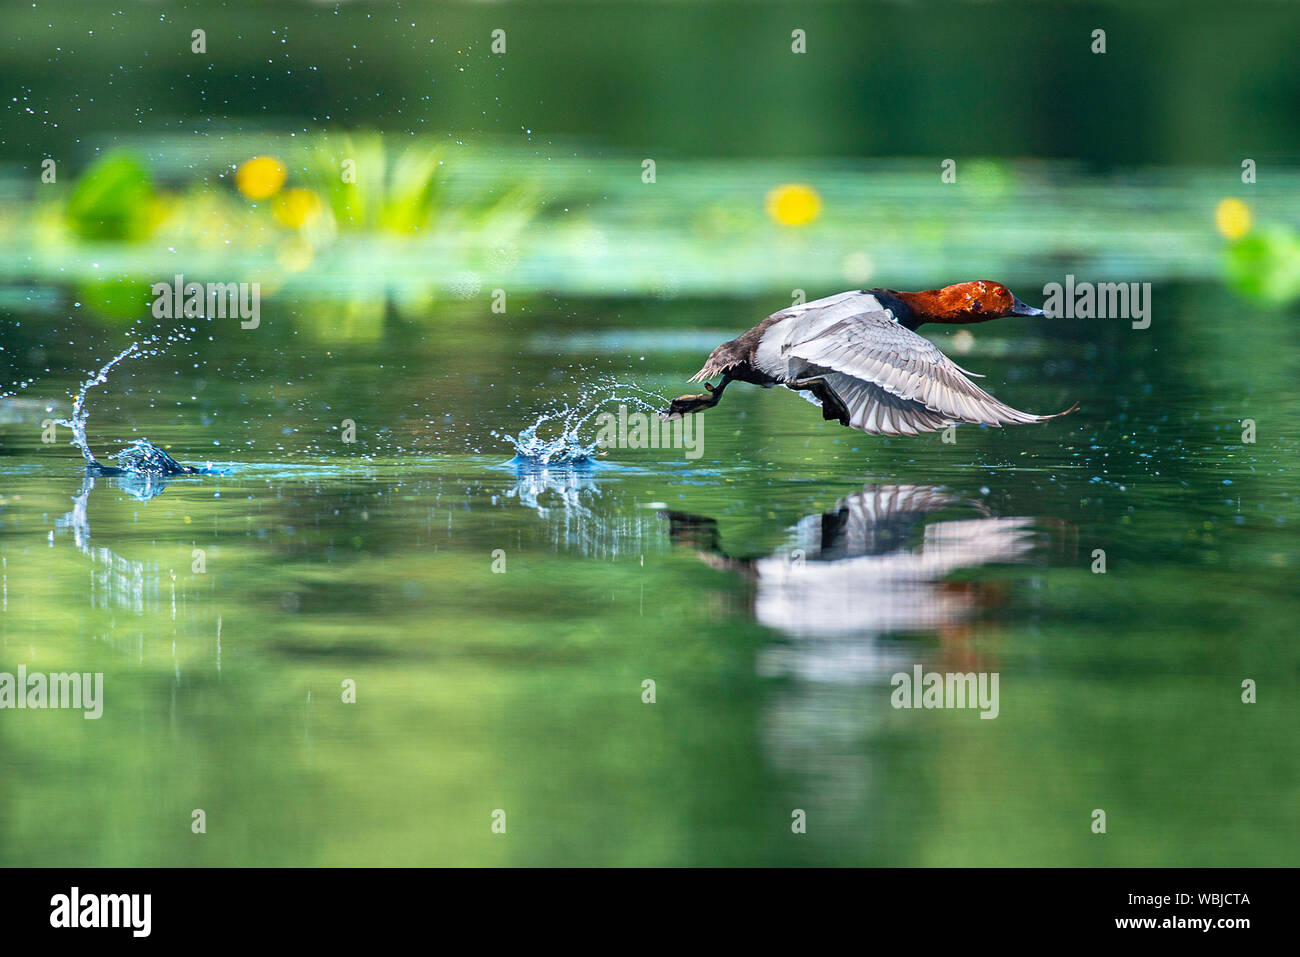 A wild duck taking off above water with it's body reflecting in the water. Stock Photo